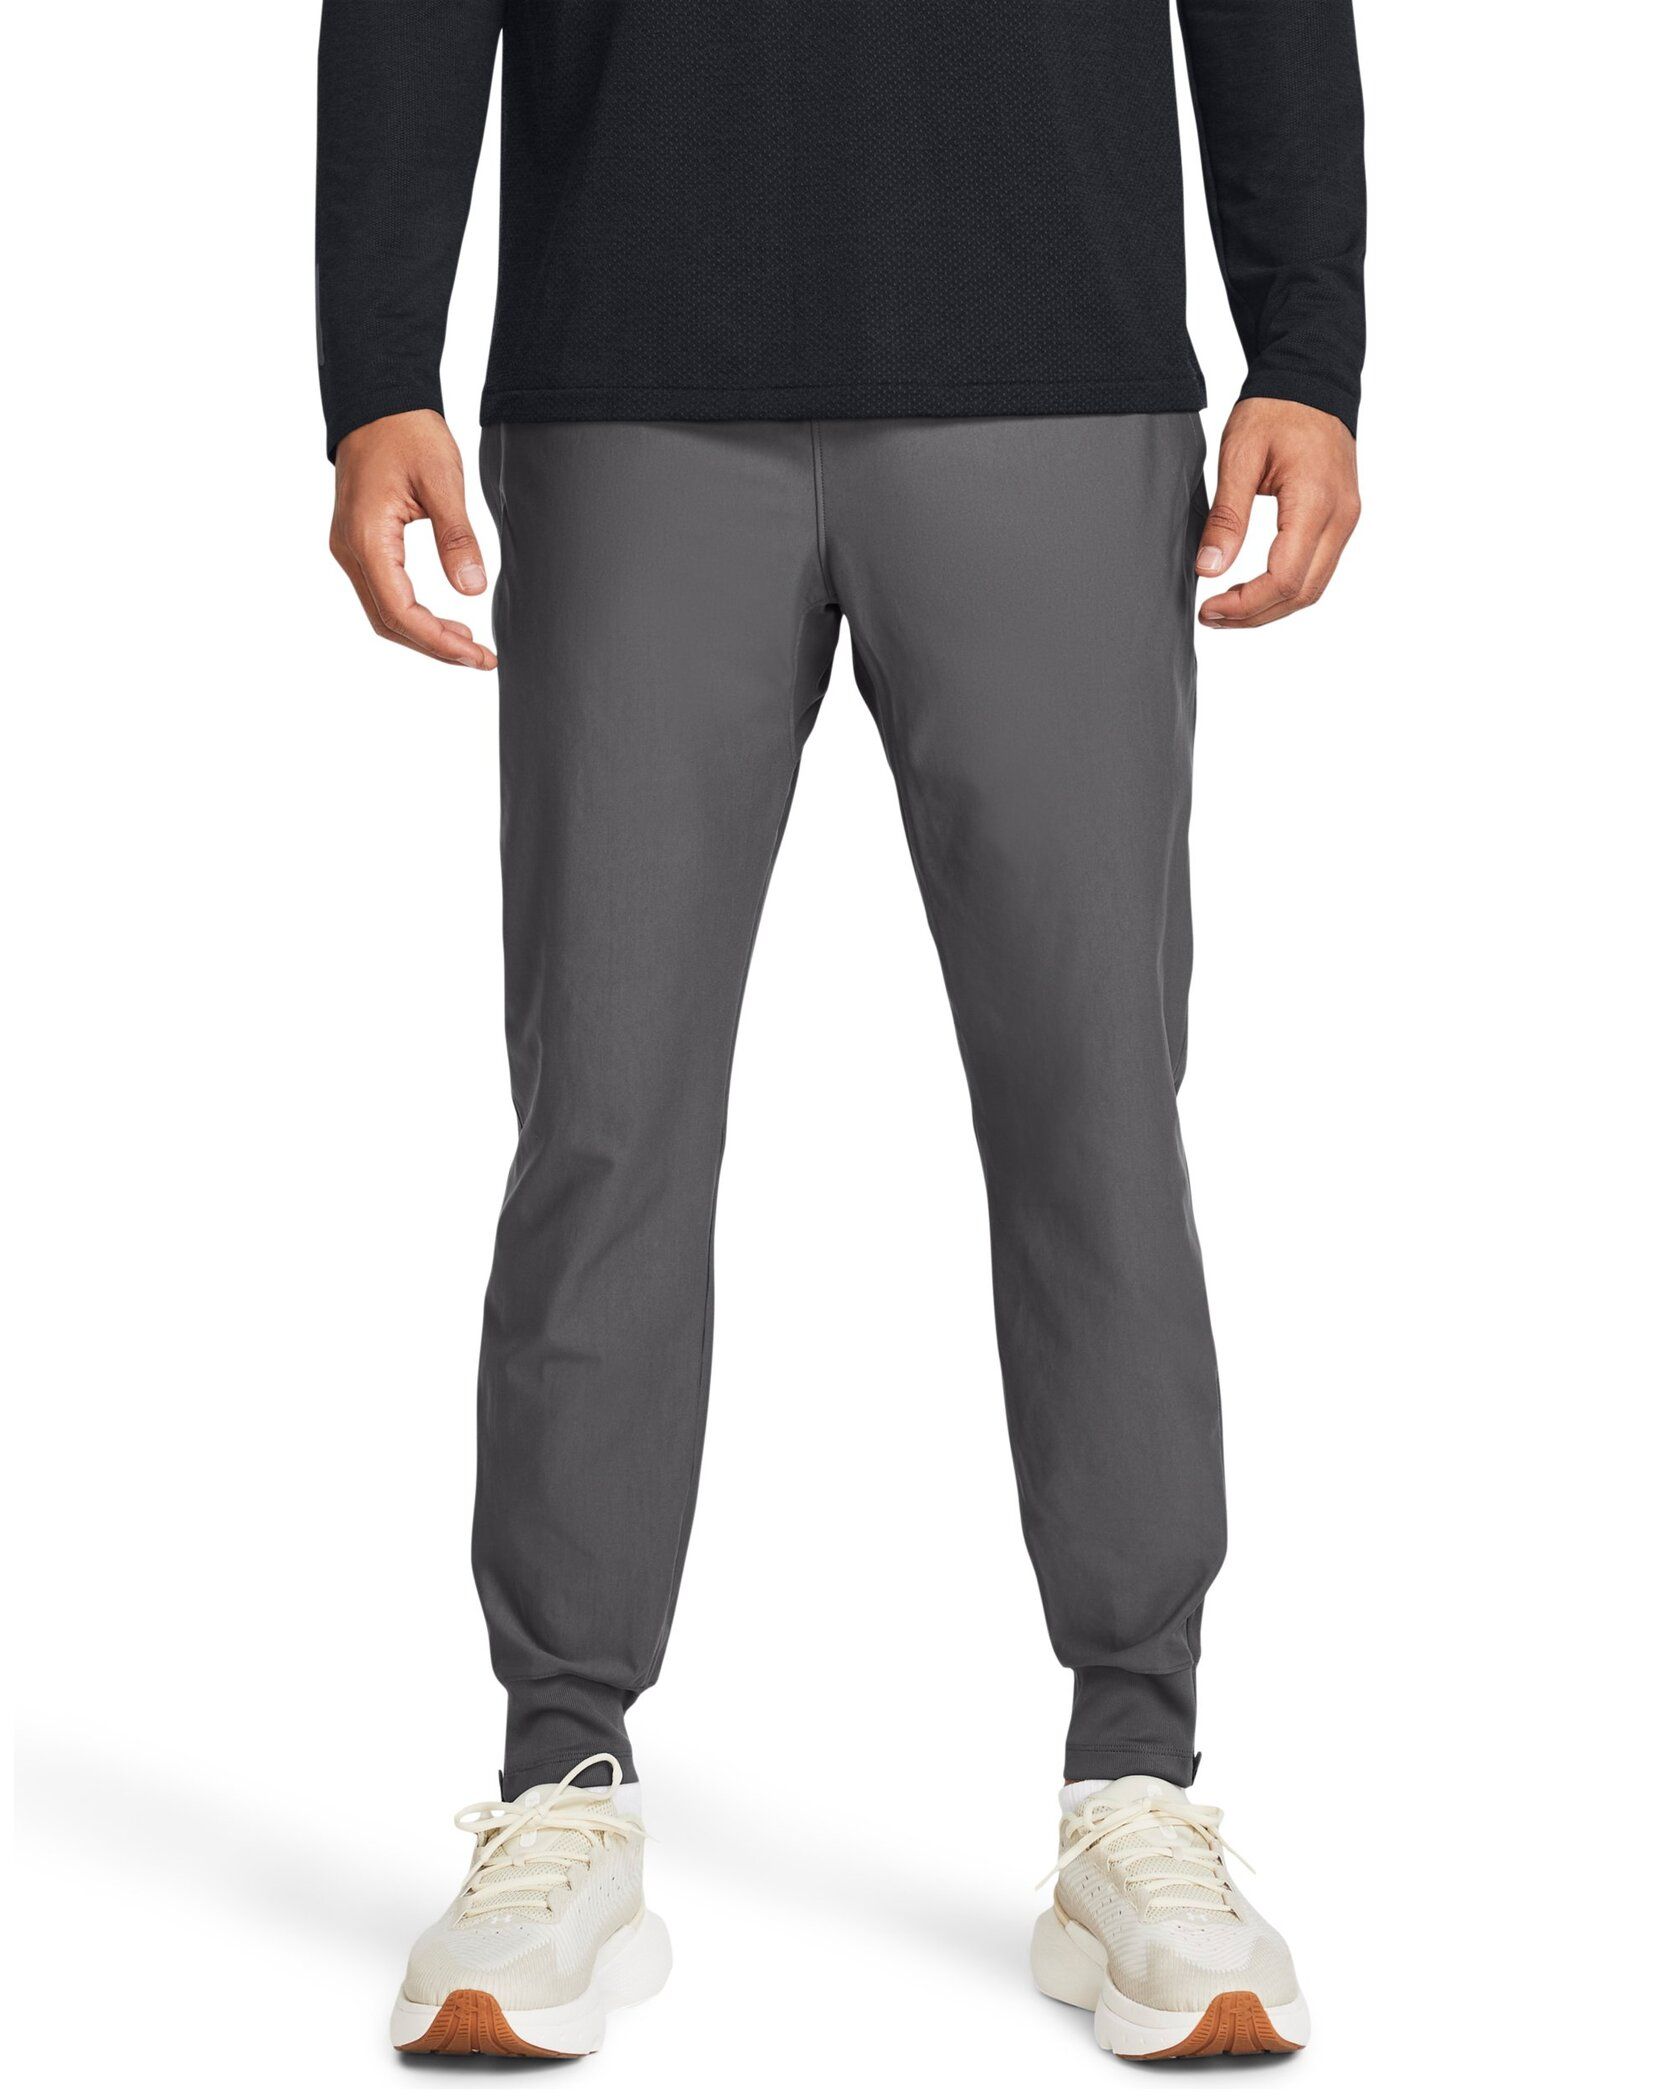 Under Armour Pants from $12.94 Shipped (Regularly $40)